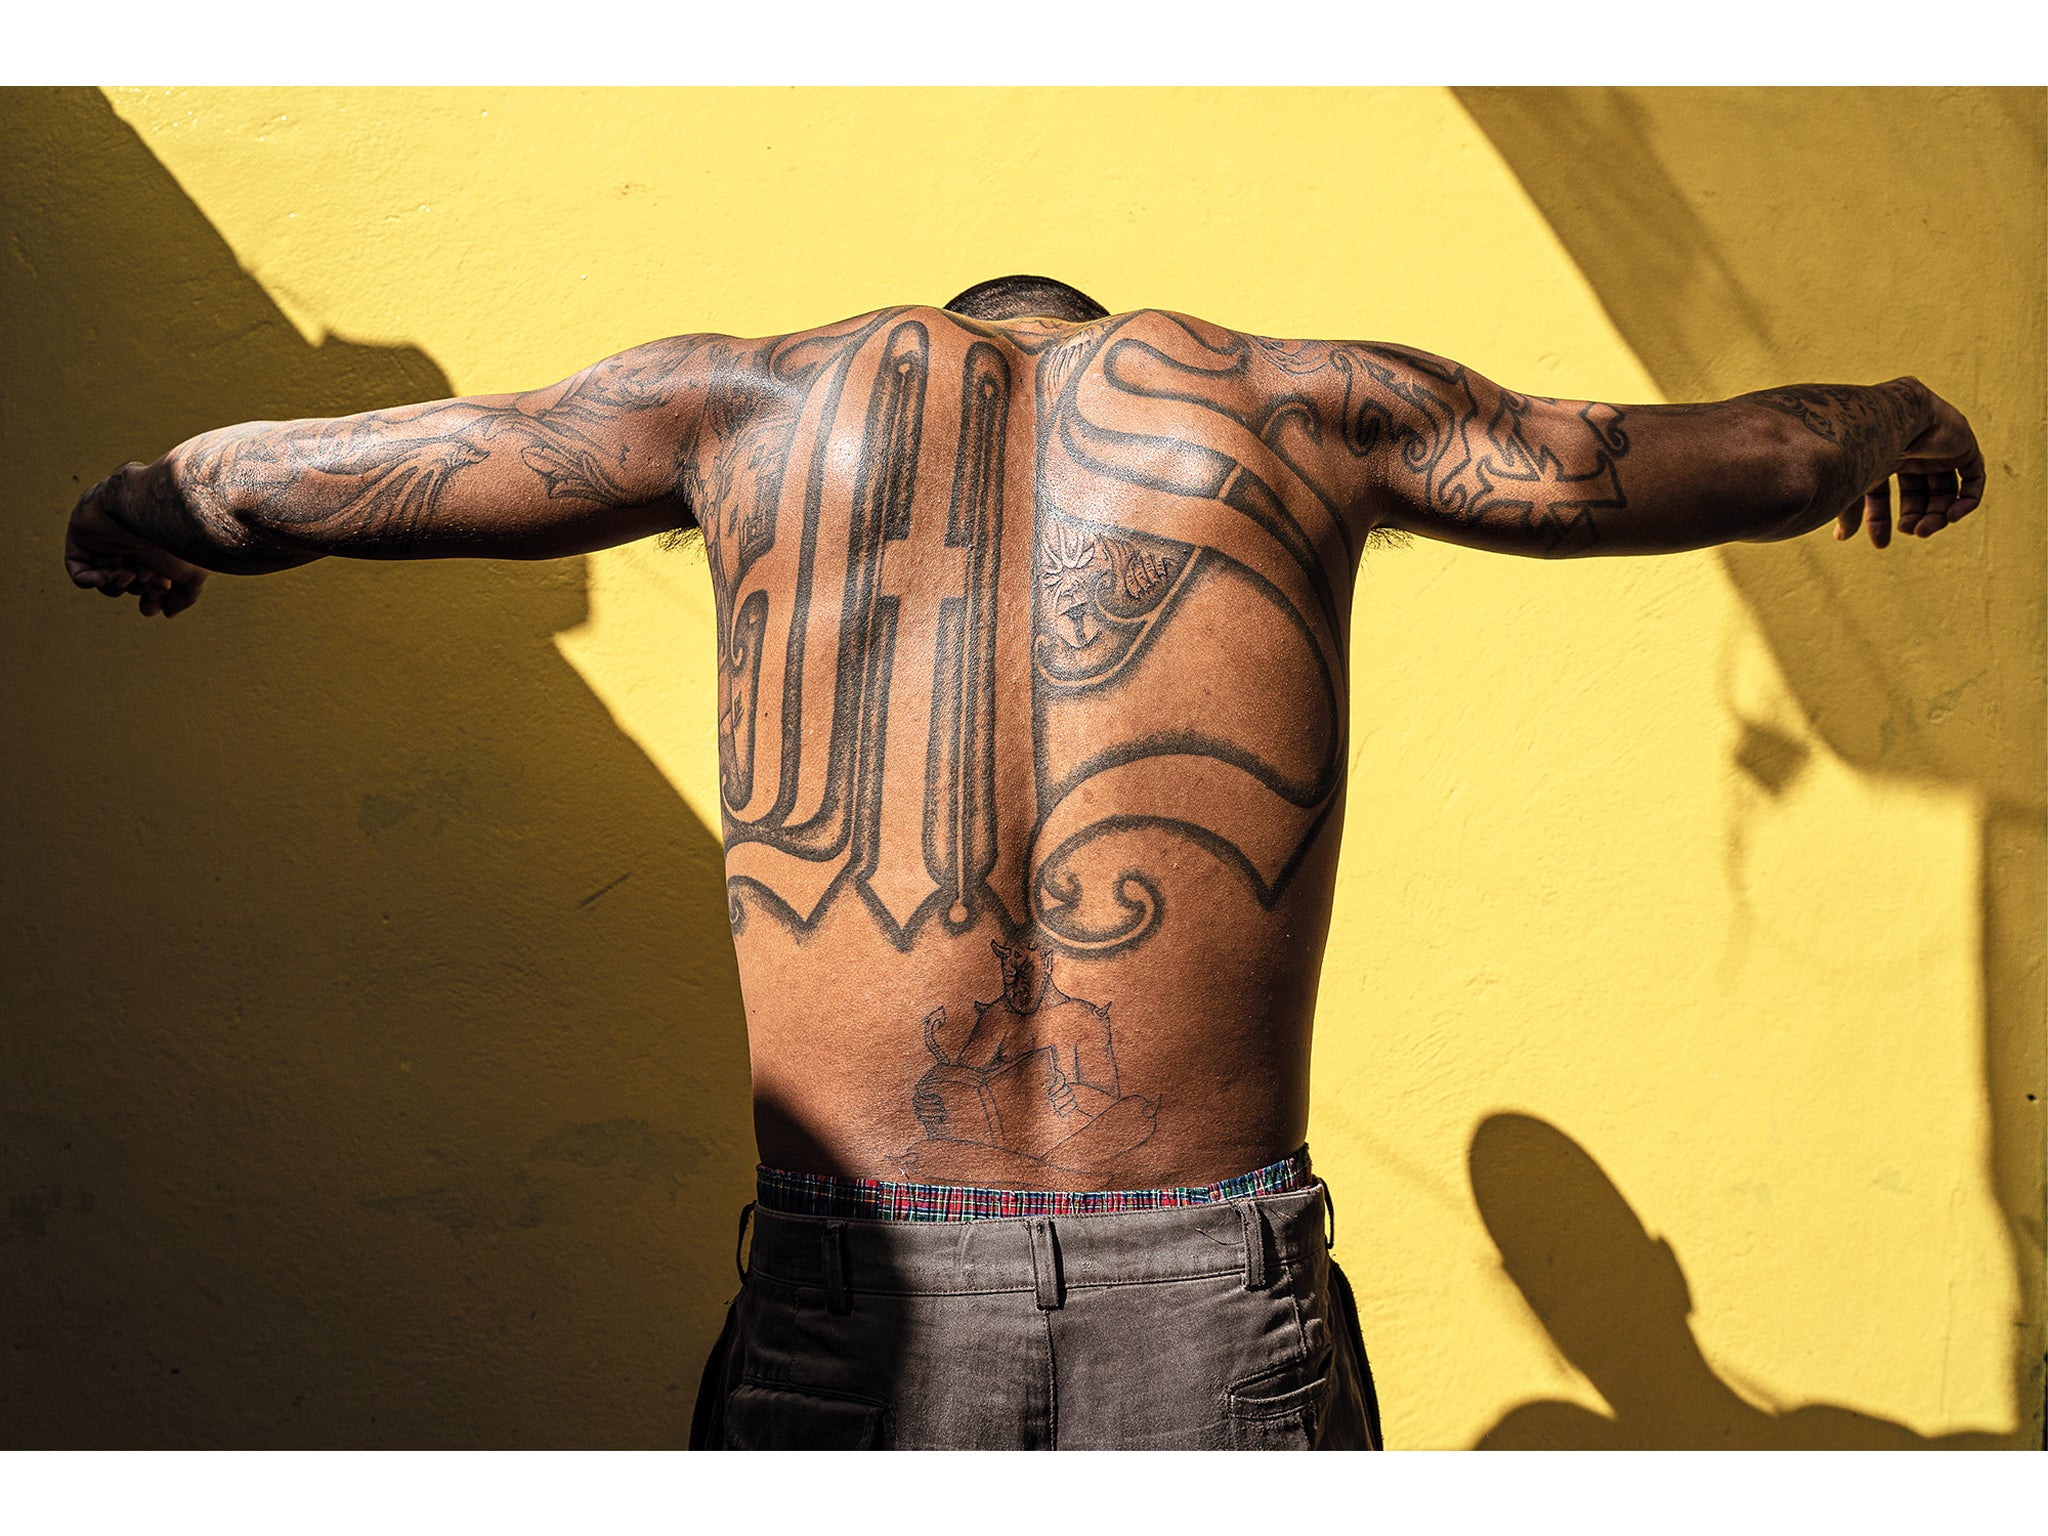 A member of MS-13, aged 27, at the Chalatenango Penal Centre